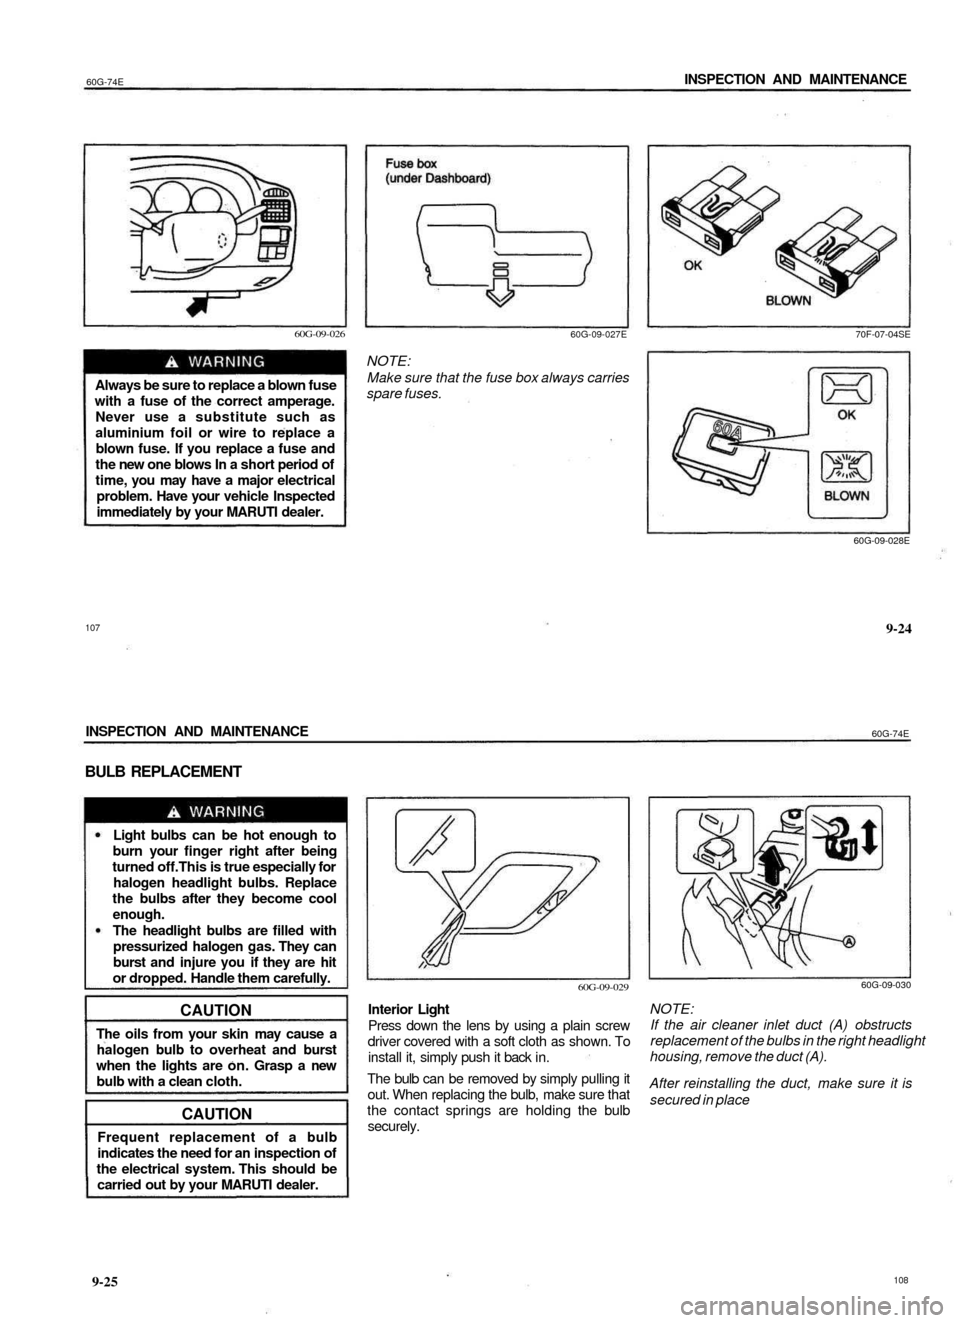 SUZUKI BALENO 1999 1.G Workshop Manual 
60G-74E 
INSPECTION AND MAINTENANCE

60G-09-026

Always be sure to replace a blown fuse

with a fuse of the correct amperage.

Never use a substitute such as

aluminium foil or wire to replace a

blo